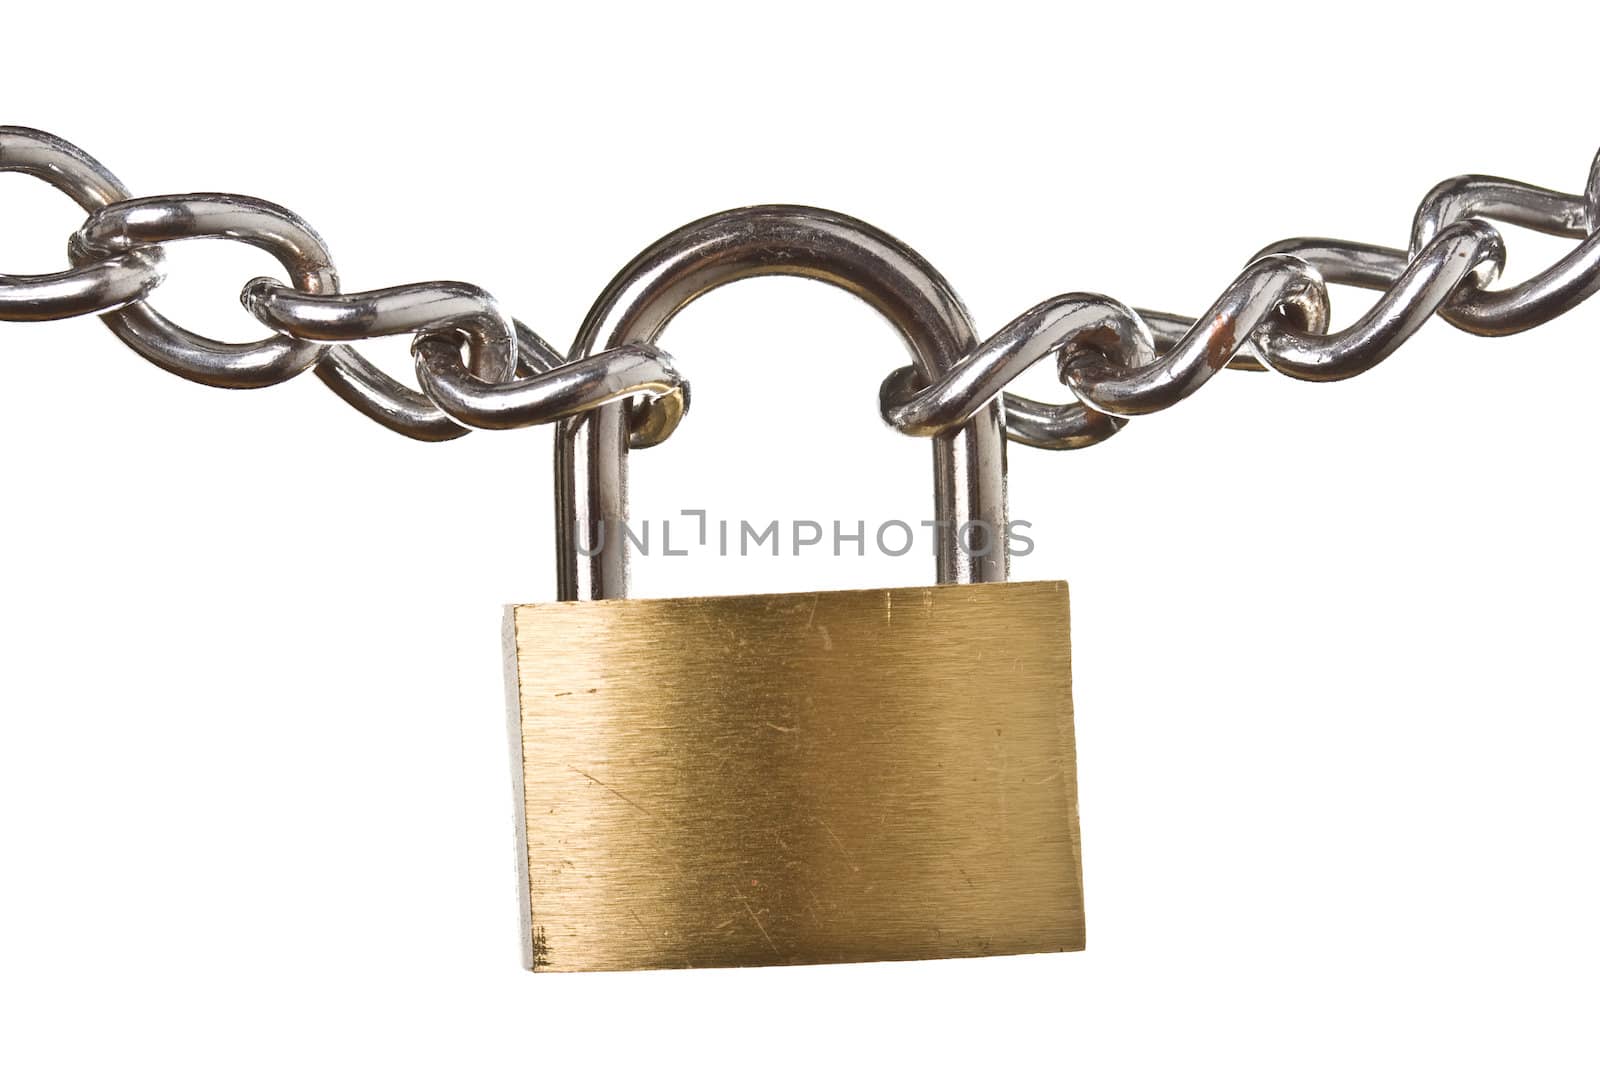 Security concept - padlock on chain isolated on white background